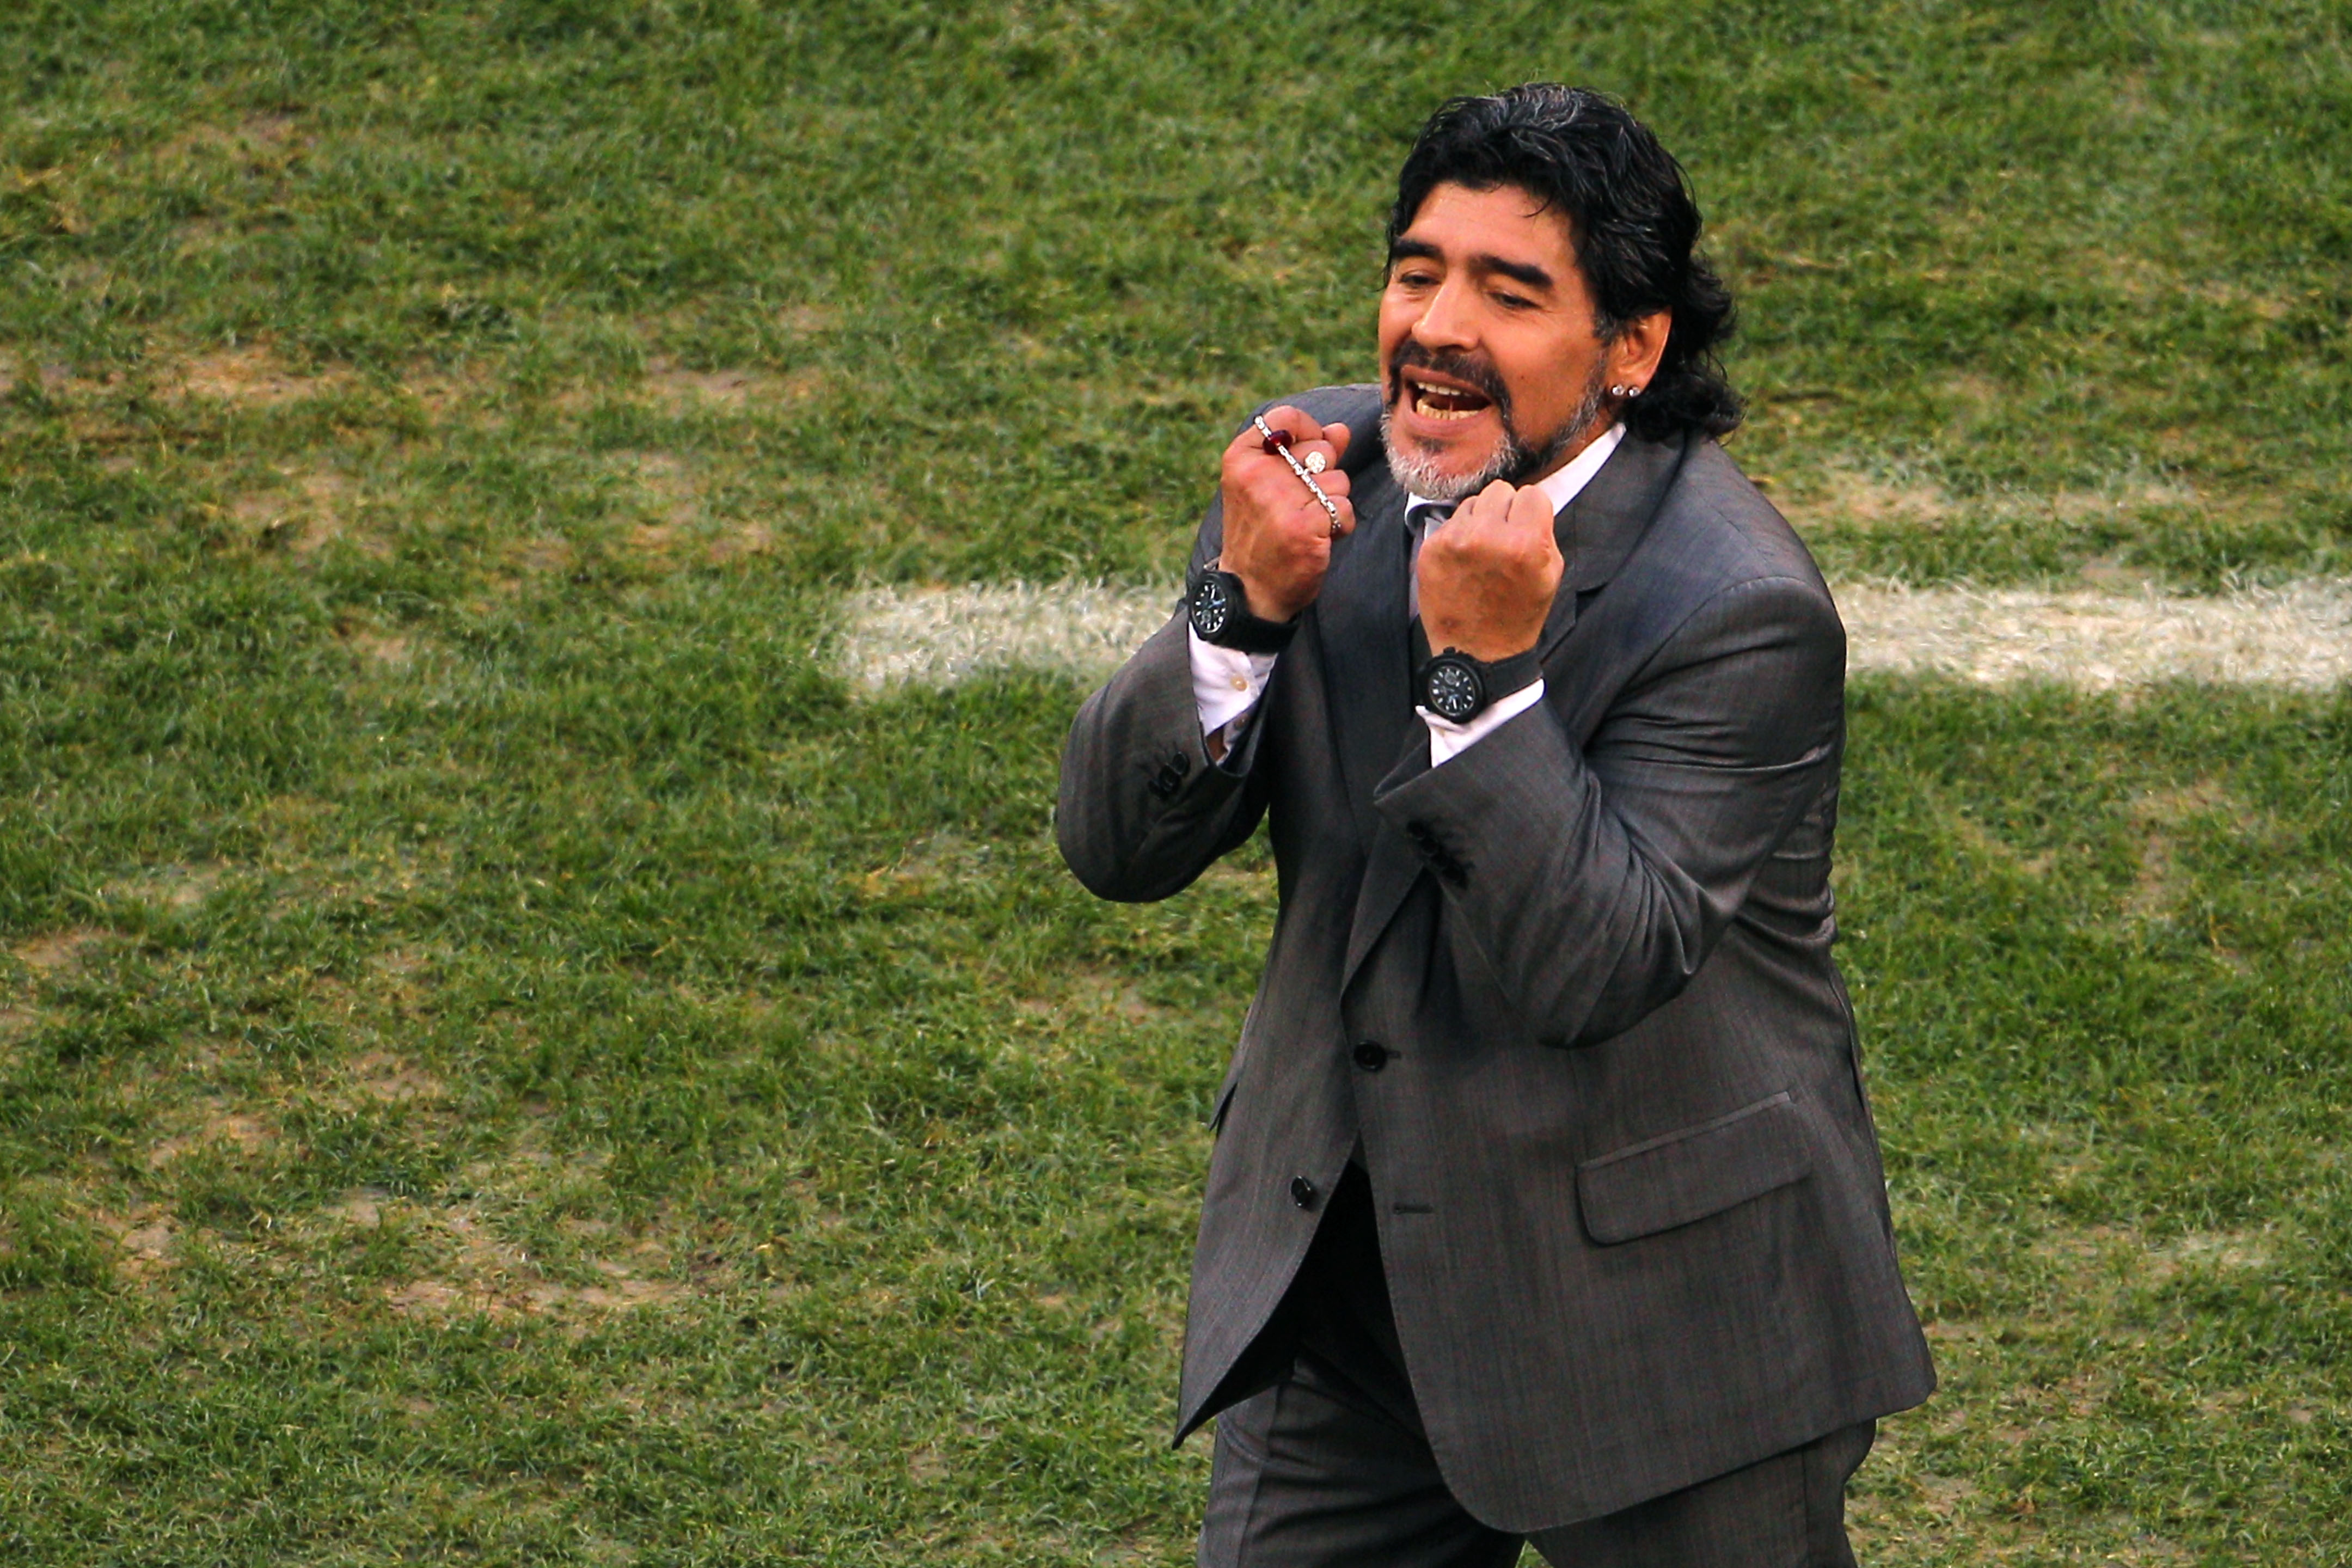 CAPE TOWN, SOUTH AFRICA - JULY 03:  Diego Maradona head coach of Argentina gestures in frustration on the touchline during the 2010 FIFA World Cup South Africa Quarter Final match between Argentina and Germany at Green Point Stadium on July 3, 2010 in Cap